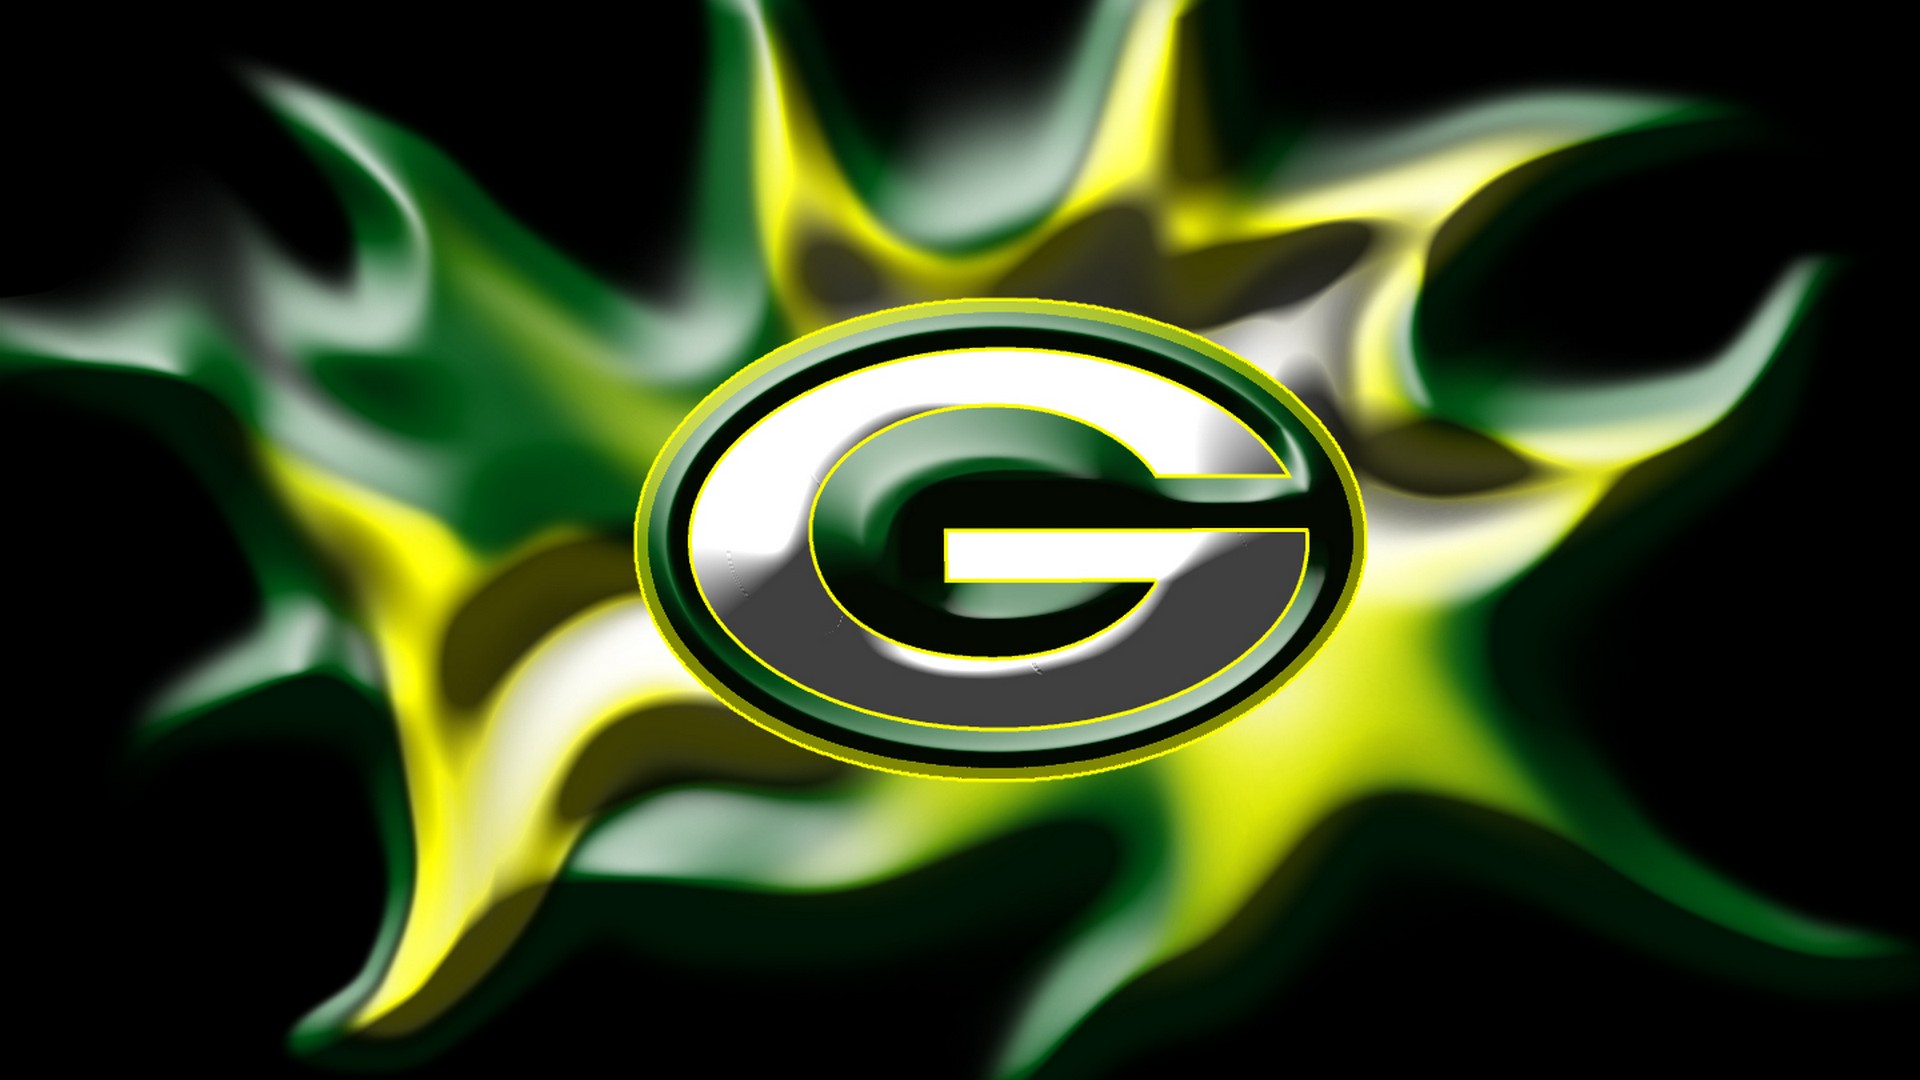 HD Desktop Wallpaper Green Bay Packers Logo With high-resolution 1920X1080 pixel. You can use this wallpaper for your Mac or Windows Desktop Background, iPhone, Android or Tablet and another Smartphone device